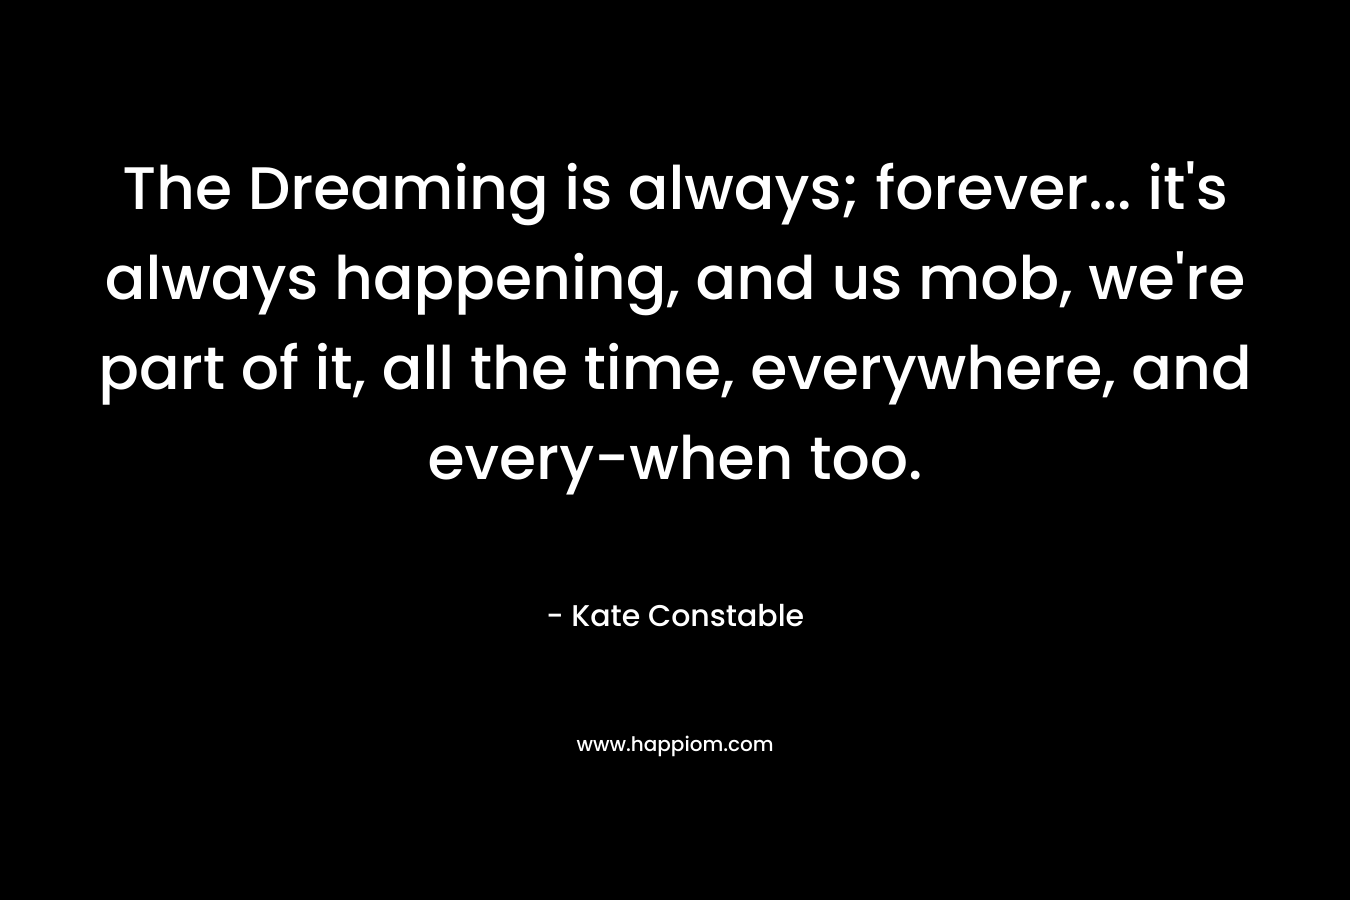 The Dreaming is always; forever... it's always happening, and us mob, we're part of it, all the time, everywhere, and every-when too.